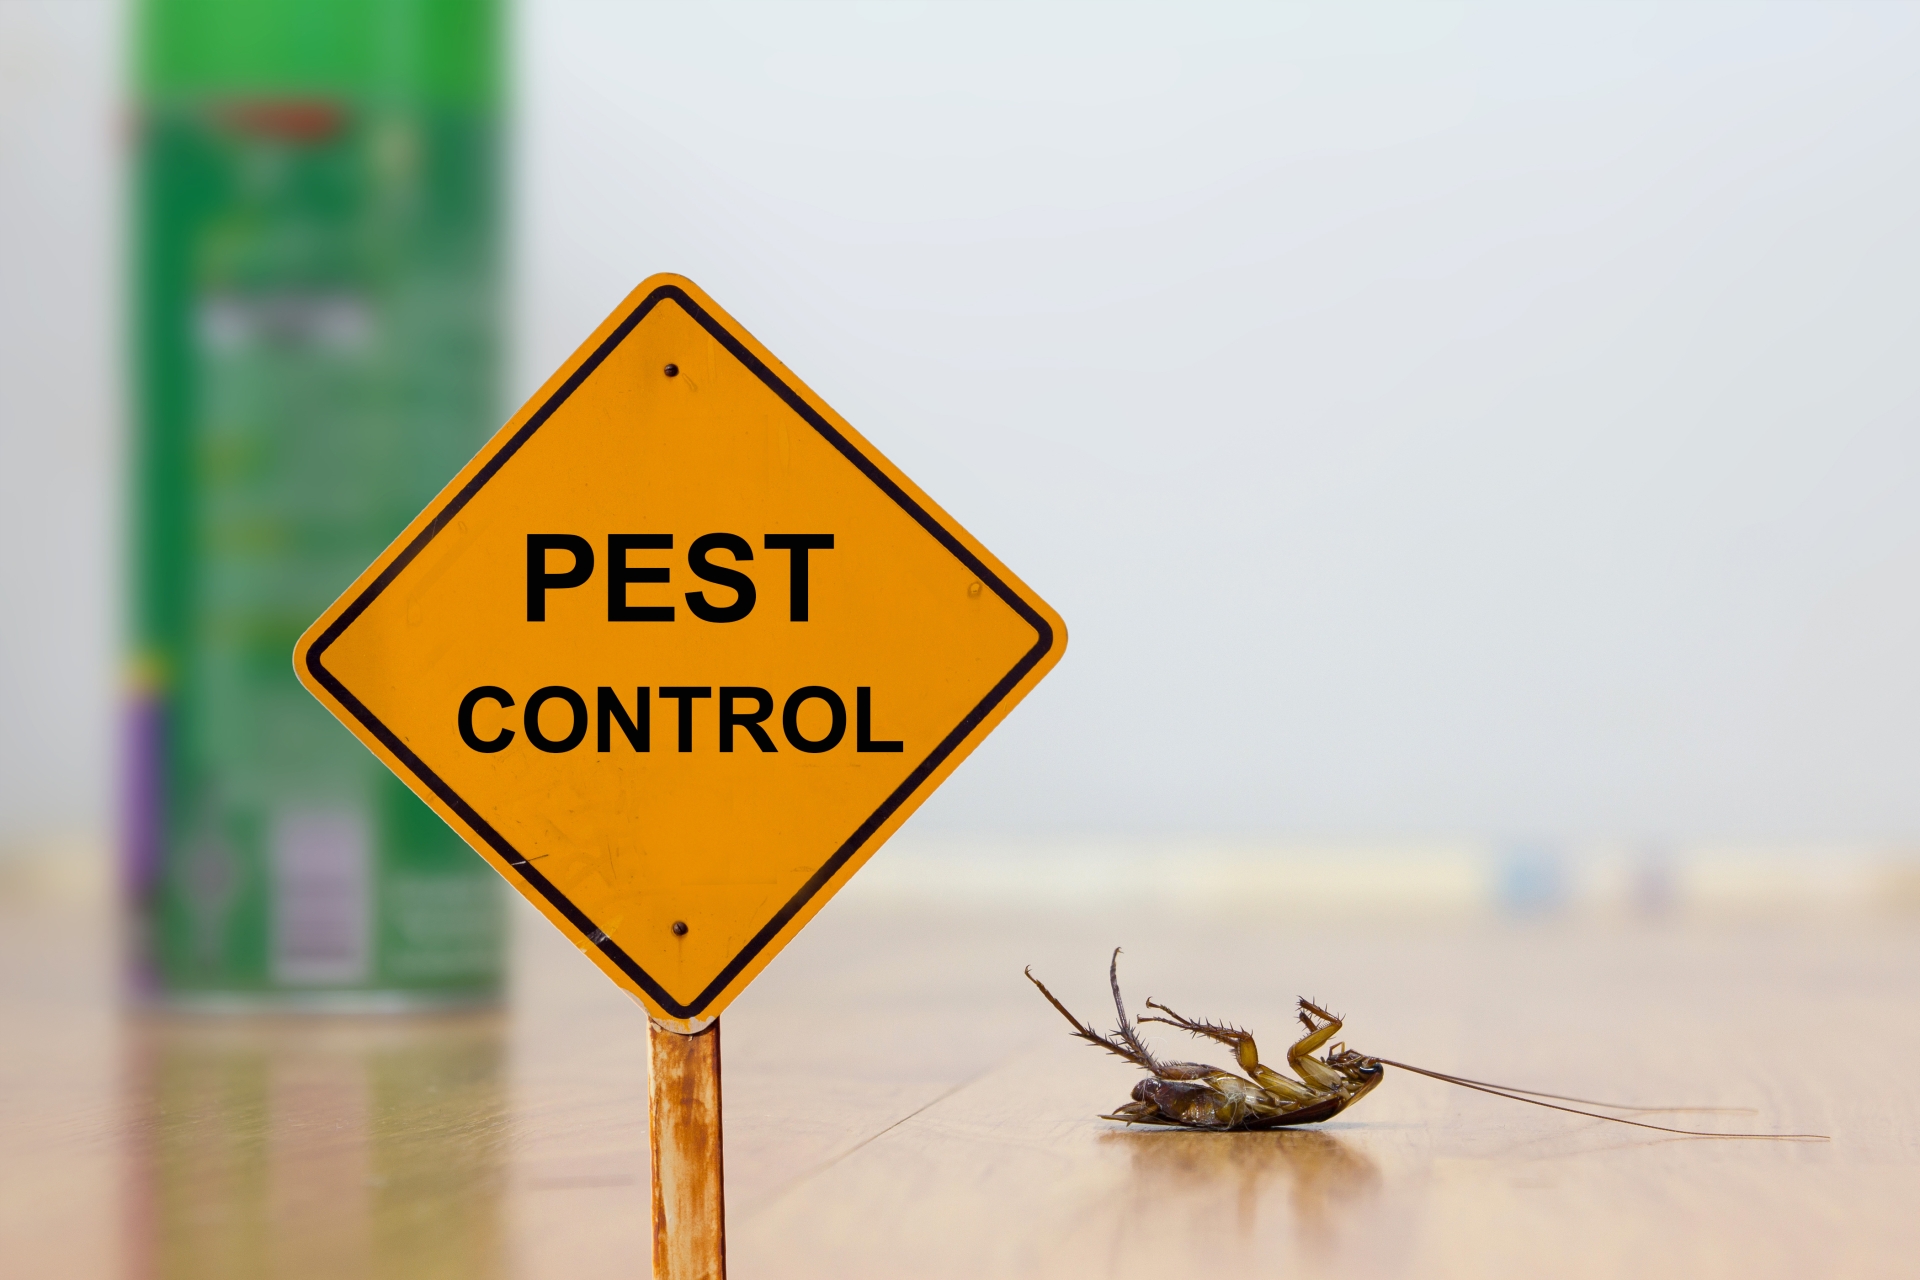 24 Hour Pest Control, Pest Control in South Lambeth, SW8. Call Now 020 8166 9746